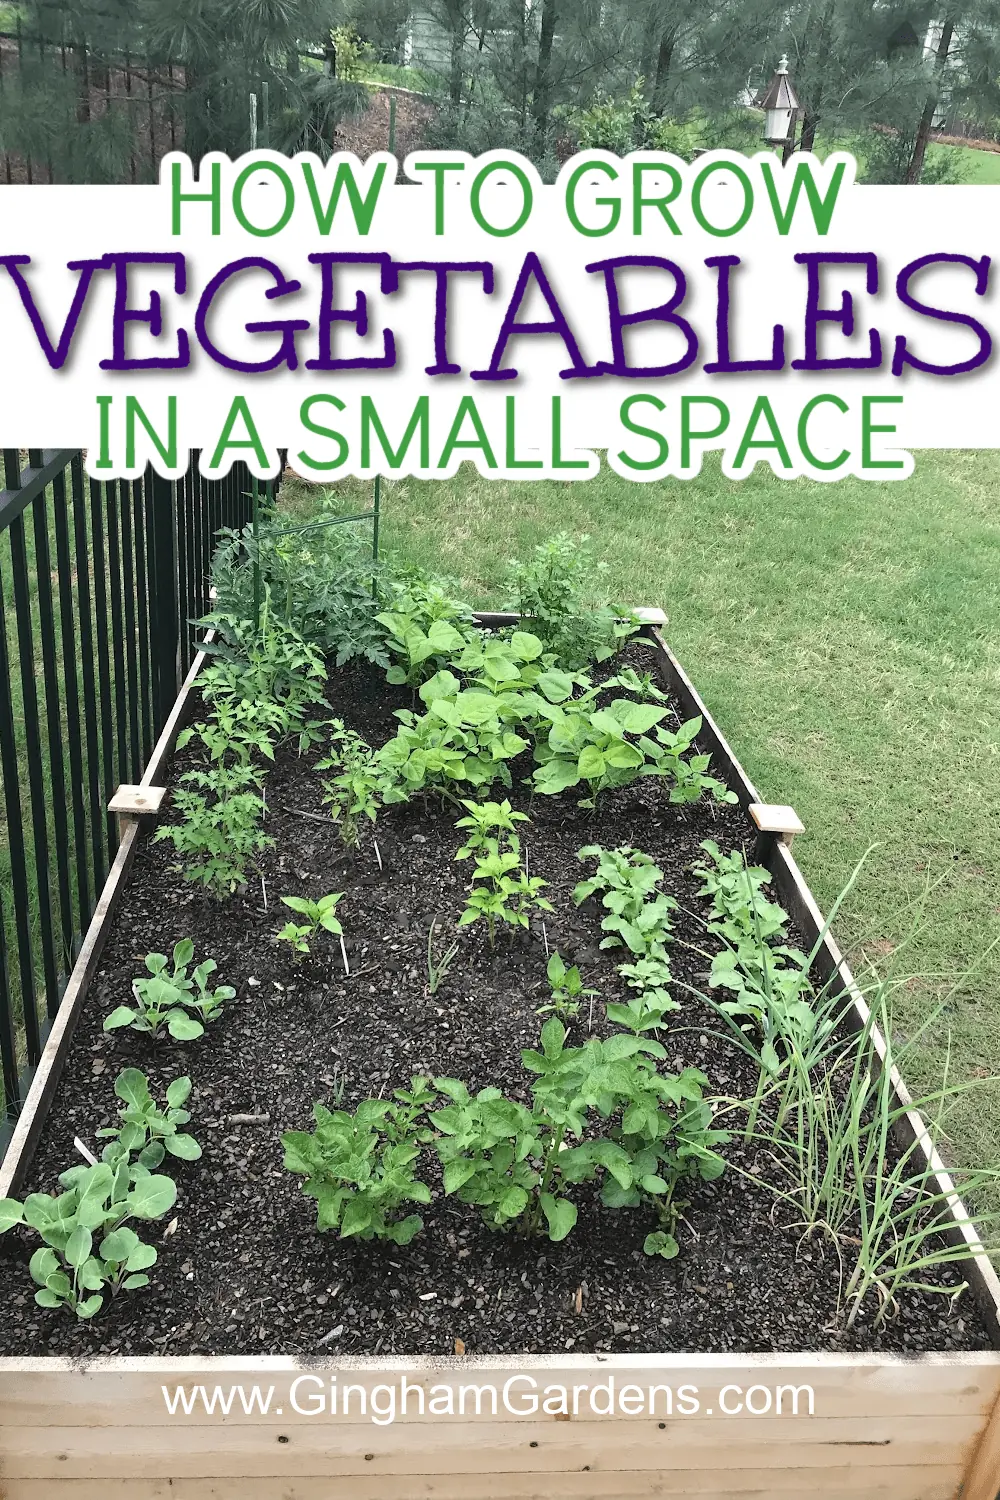 https://ginghamgardens.com/wp-content/uploads/2023/02/Vegetables-in-a-Small-Space-020423-5.webp